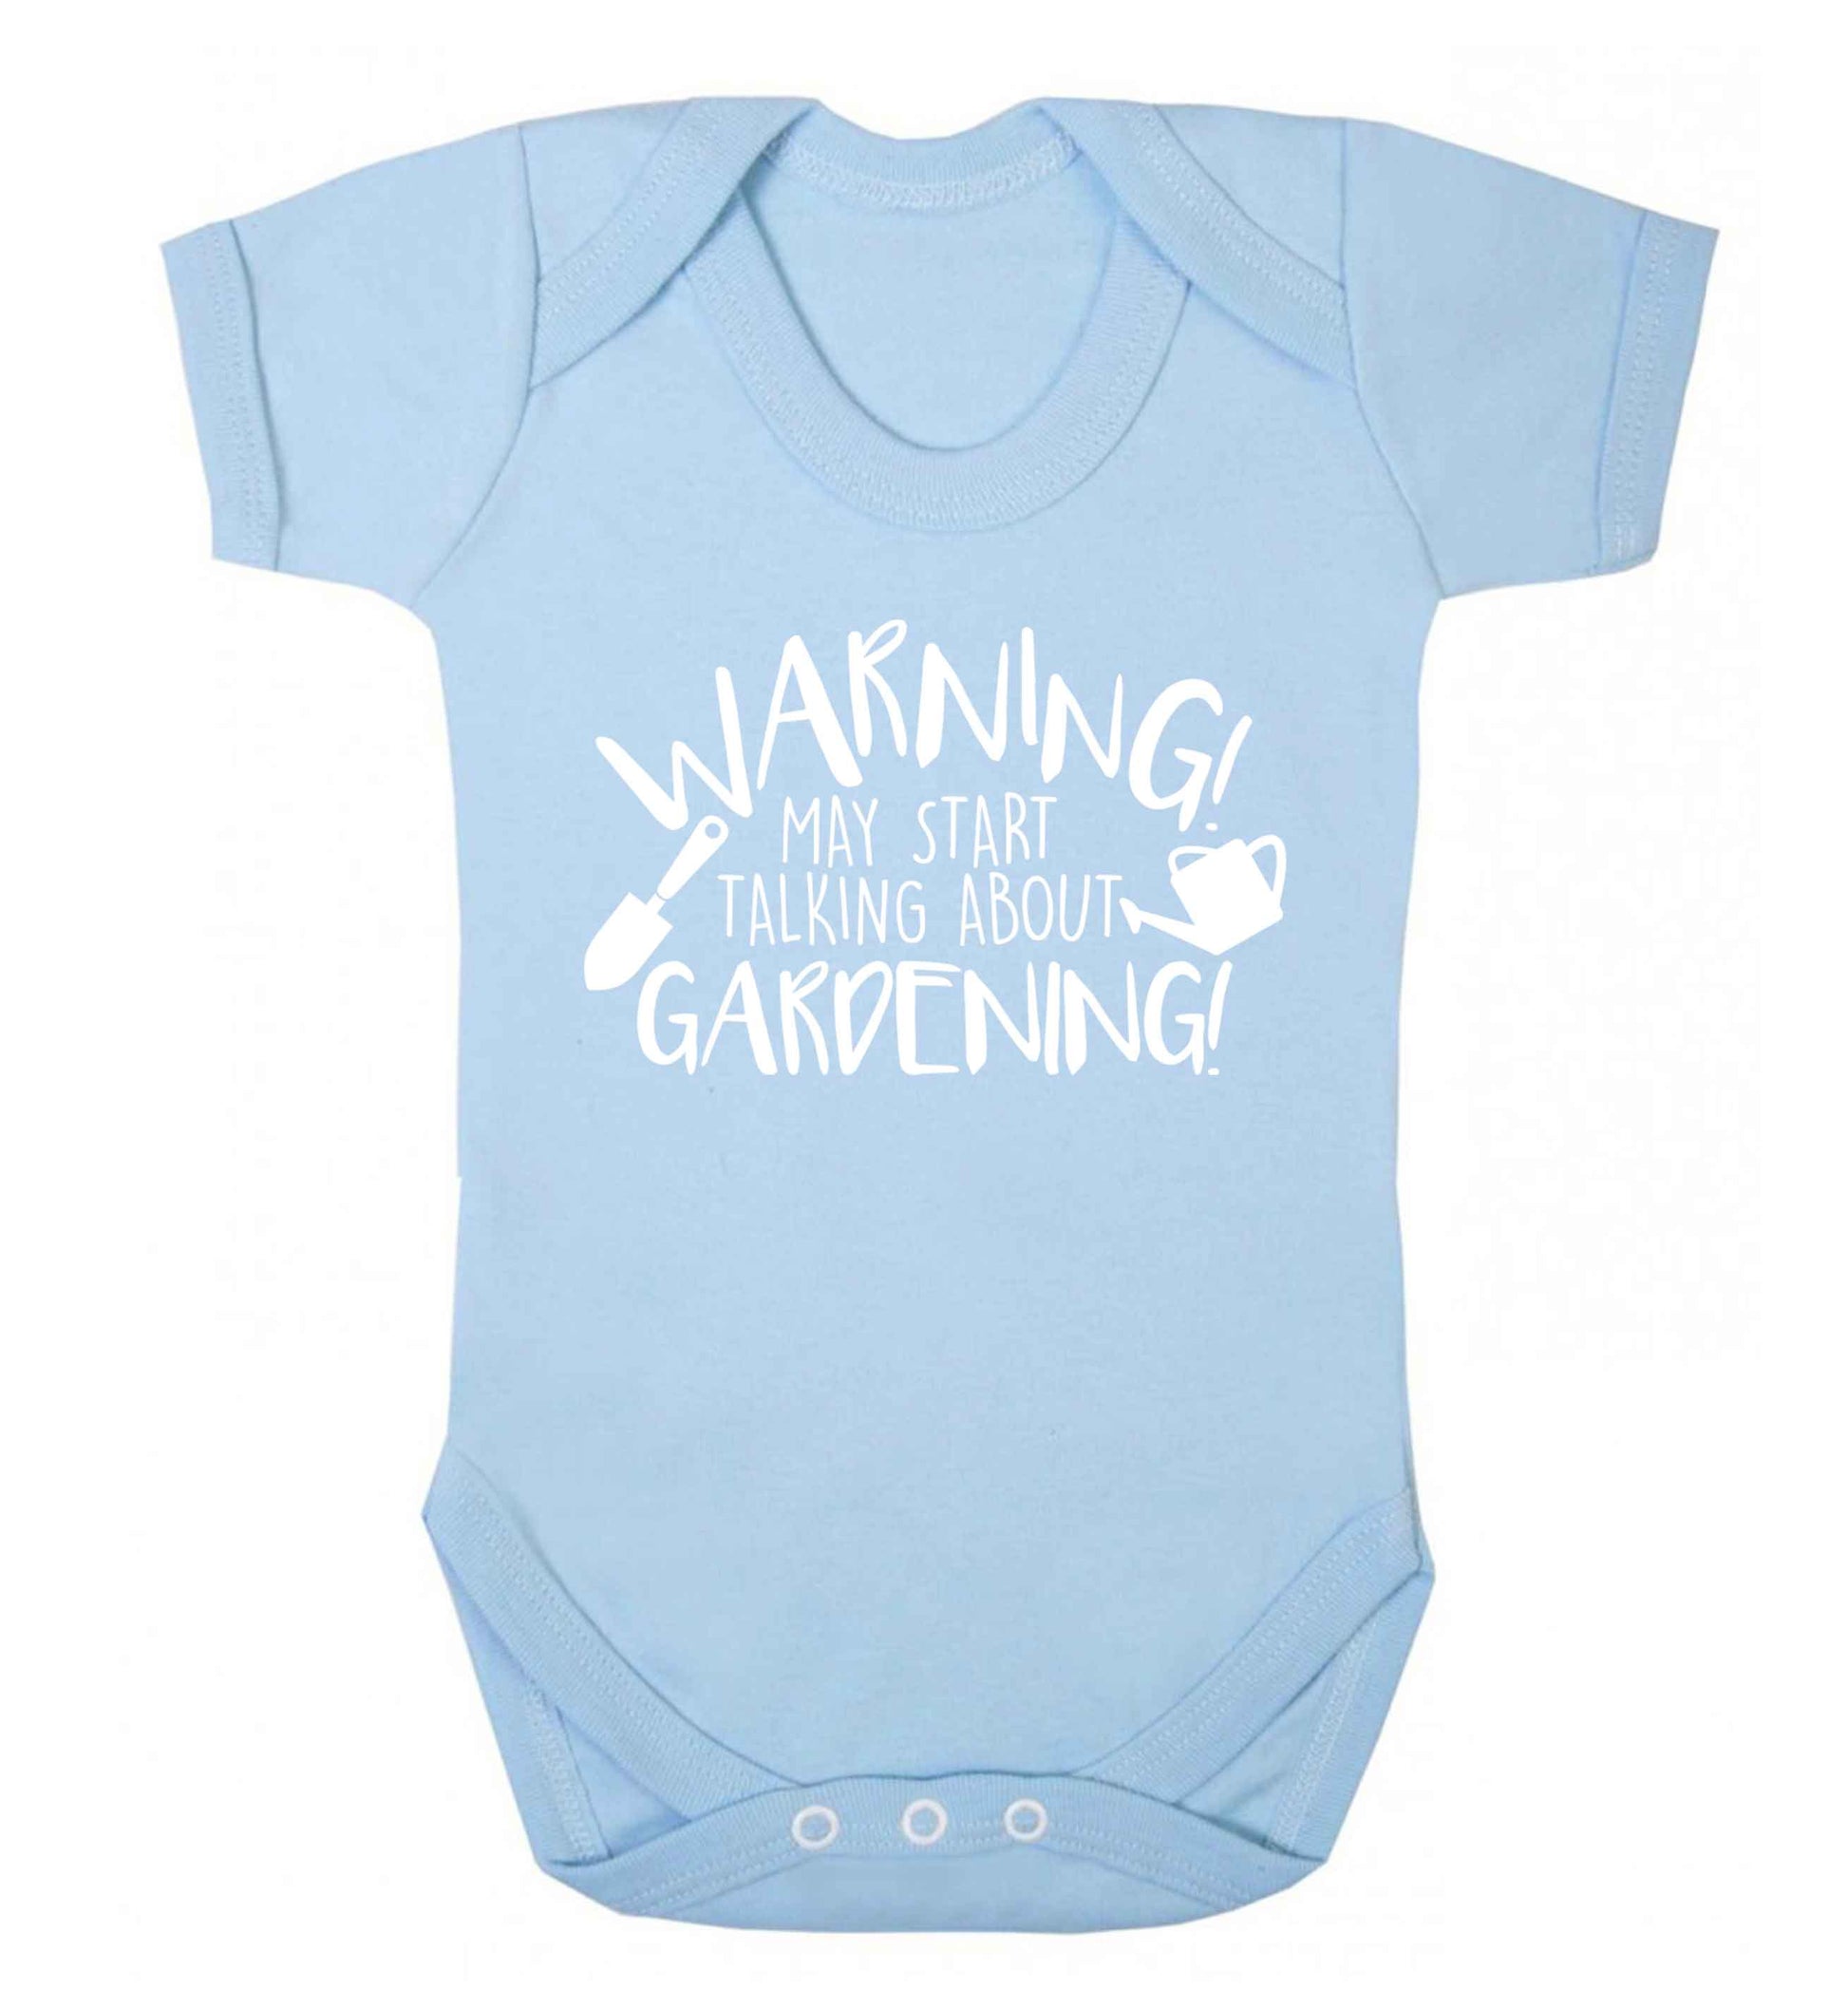 Warning may start talking about gardening Baby Vest pale blue 18-24 months